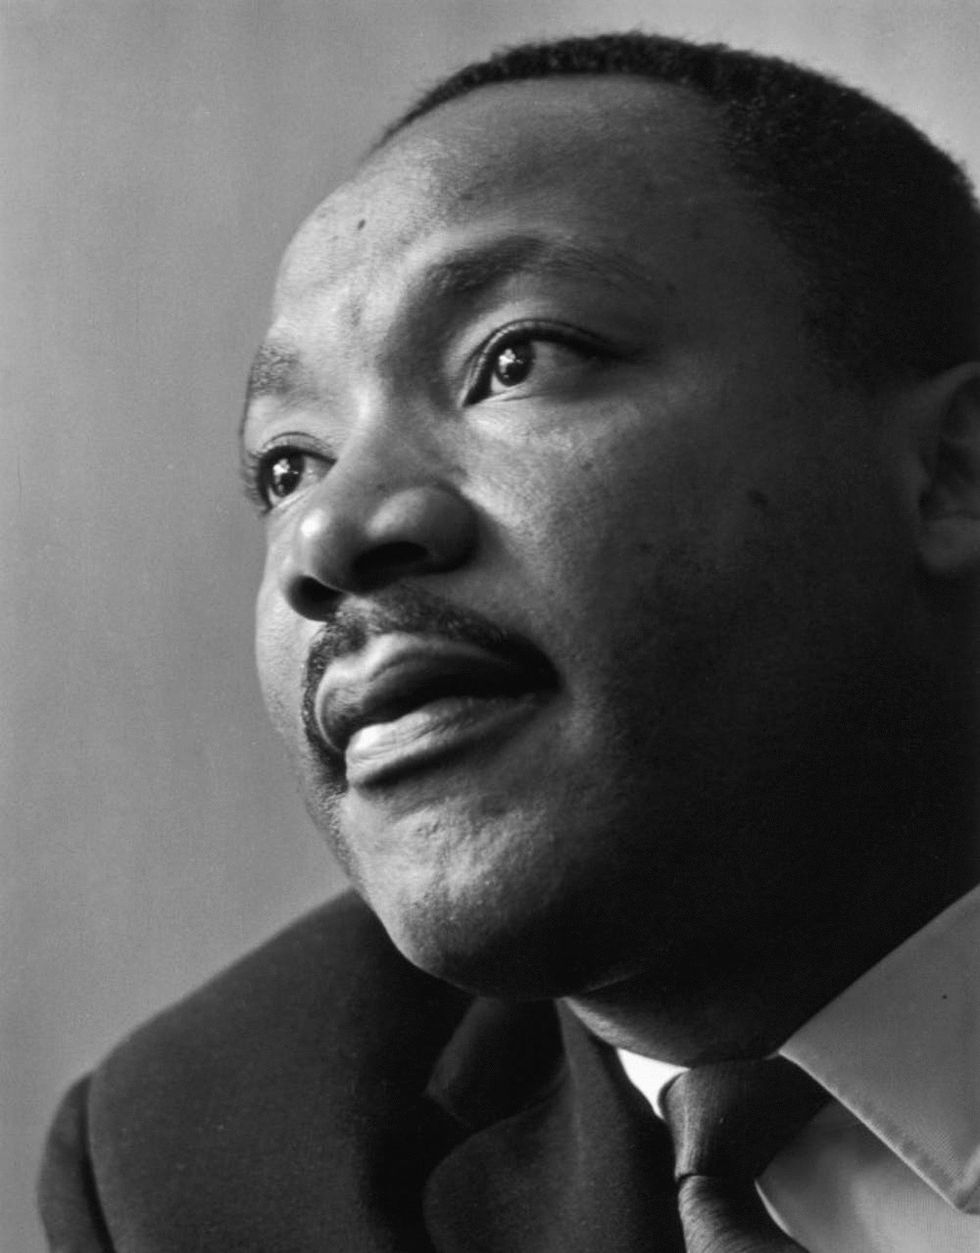 1964: American civil rights campaigner Martin Luther King Jnr (1929 - 1968). (Photo by Reg Lancaster/Express/Getty Images)